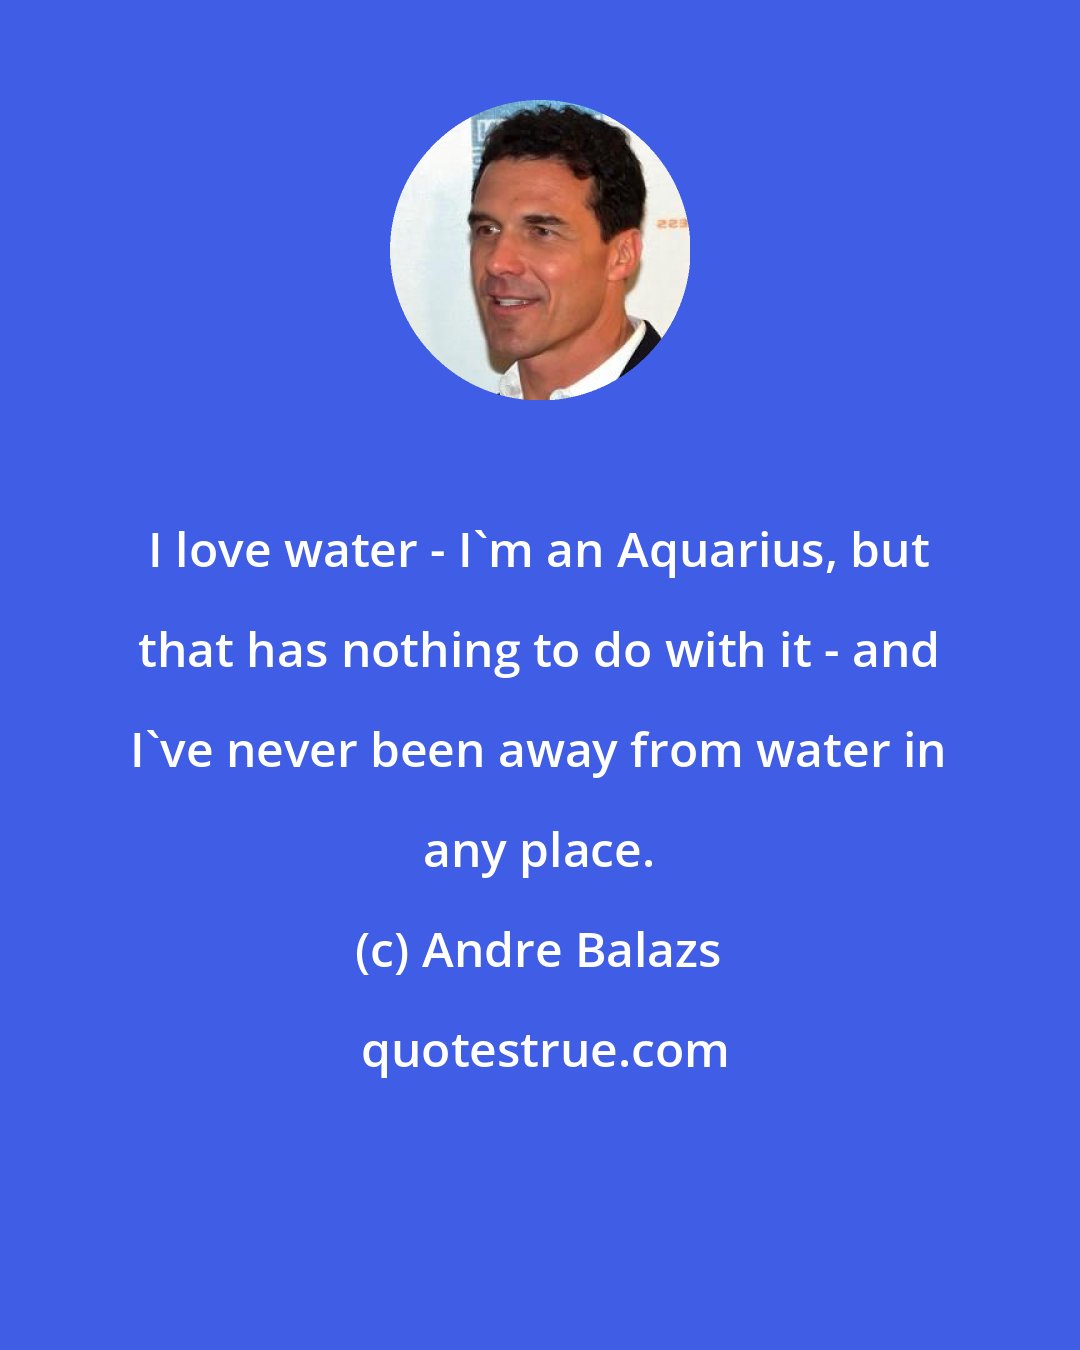 Andre Balazs: I love water - I'm an Aquarius, but that has nothing to do with it - and I've never been away from water in any place.